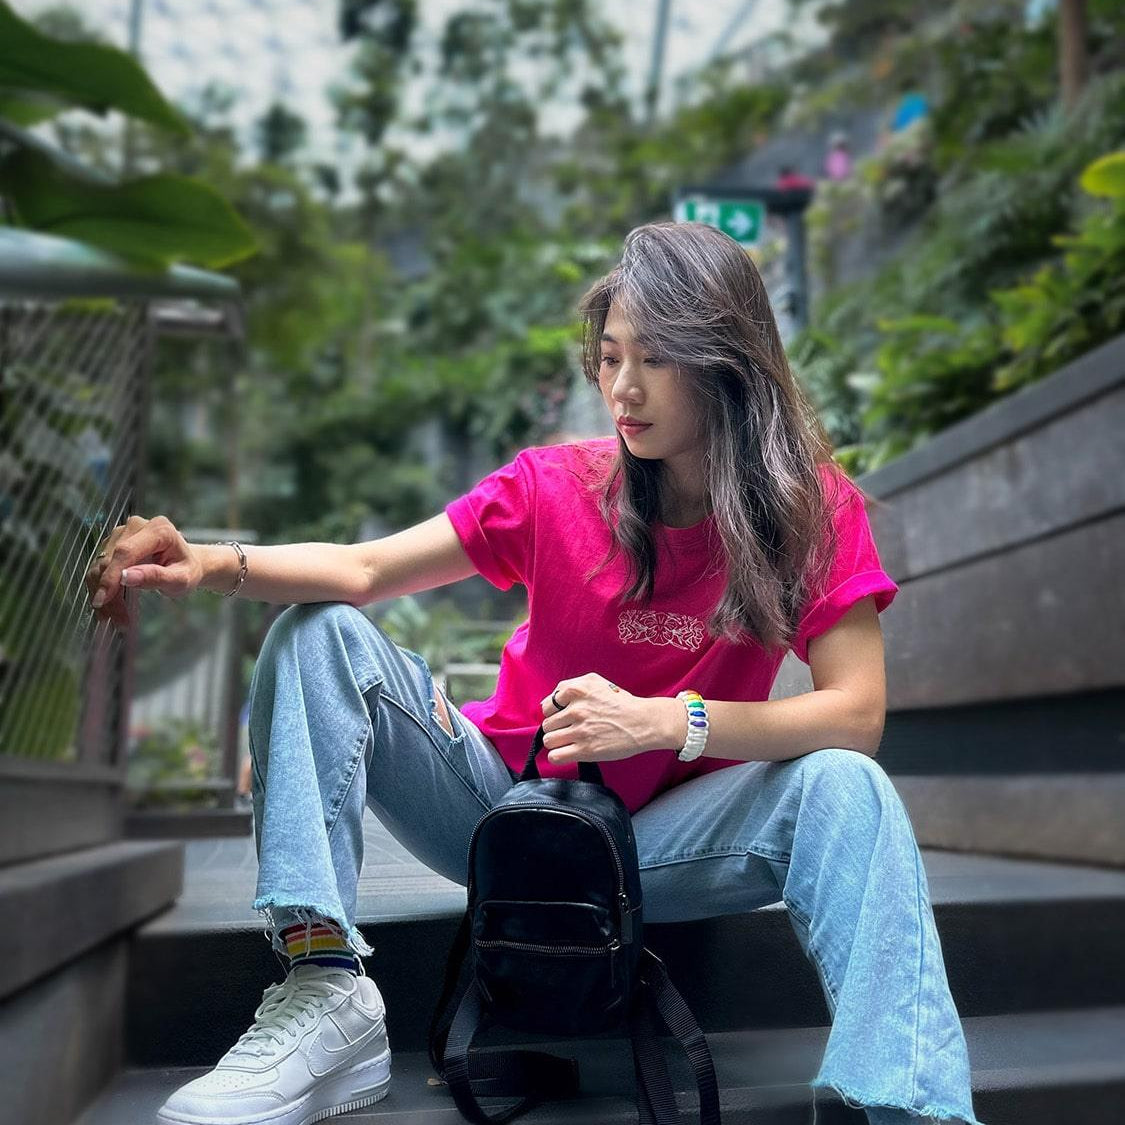 Asian female with long hair elegantly dressed in a hot pink t-shirt, embellished with a classic batik orchid flower embroidery, complemented by an array of LGBT rainbow pride accessories and a sustainable bracelet. Part of the TOMSCOUT Flourish - LGBT Pride Kits, capturing the essence of pride and style in Jewel Changi Airport Singapore.